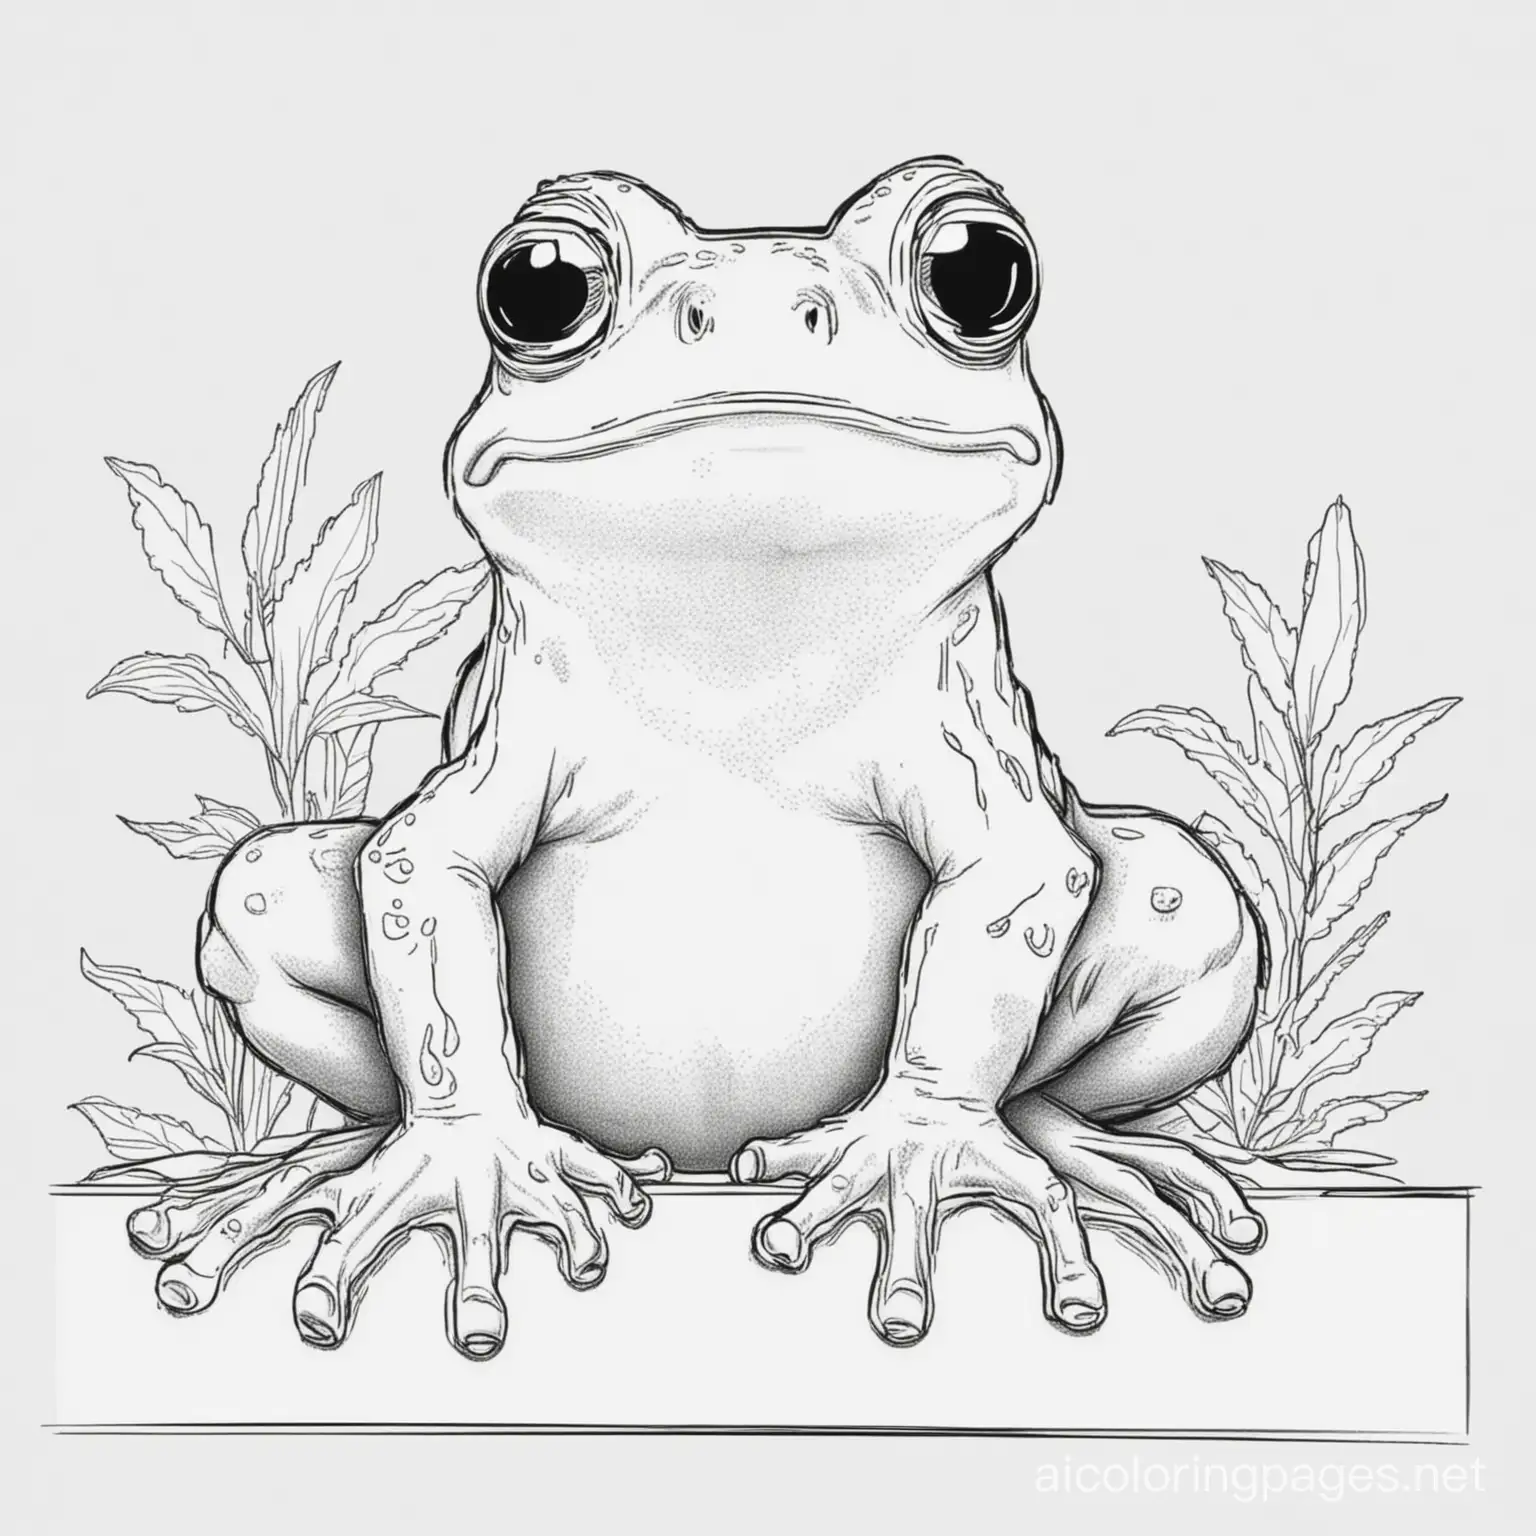  happy frog with no warts sitting next to a blank sign black and white, line art, white background, Simplicity, and Ample White Space. The background of the coloring page is plain white to make it easy for young children to color within the lines. The outlines of all the subjects are easy to distinguish, Coloring Page, black and white, line art, white background, Simplicity, Ample White Space. The background of the coloring page is plain white to make it easy for young children to color within the lines. The outlines of all the subjects are easy to distinguish, making it simple for kids to color without too much difficulty